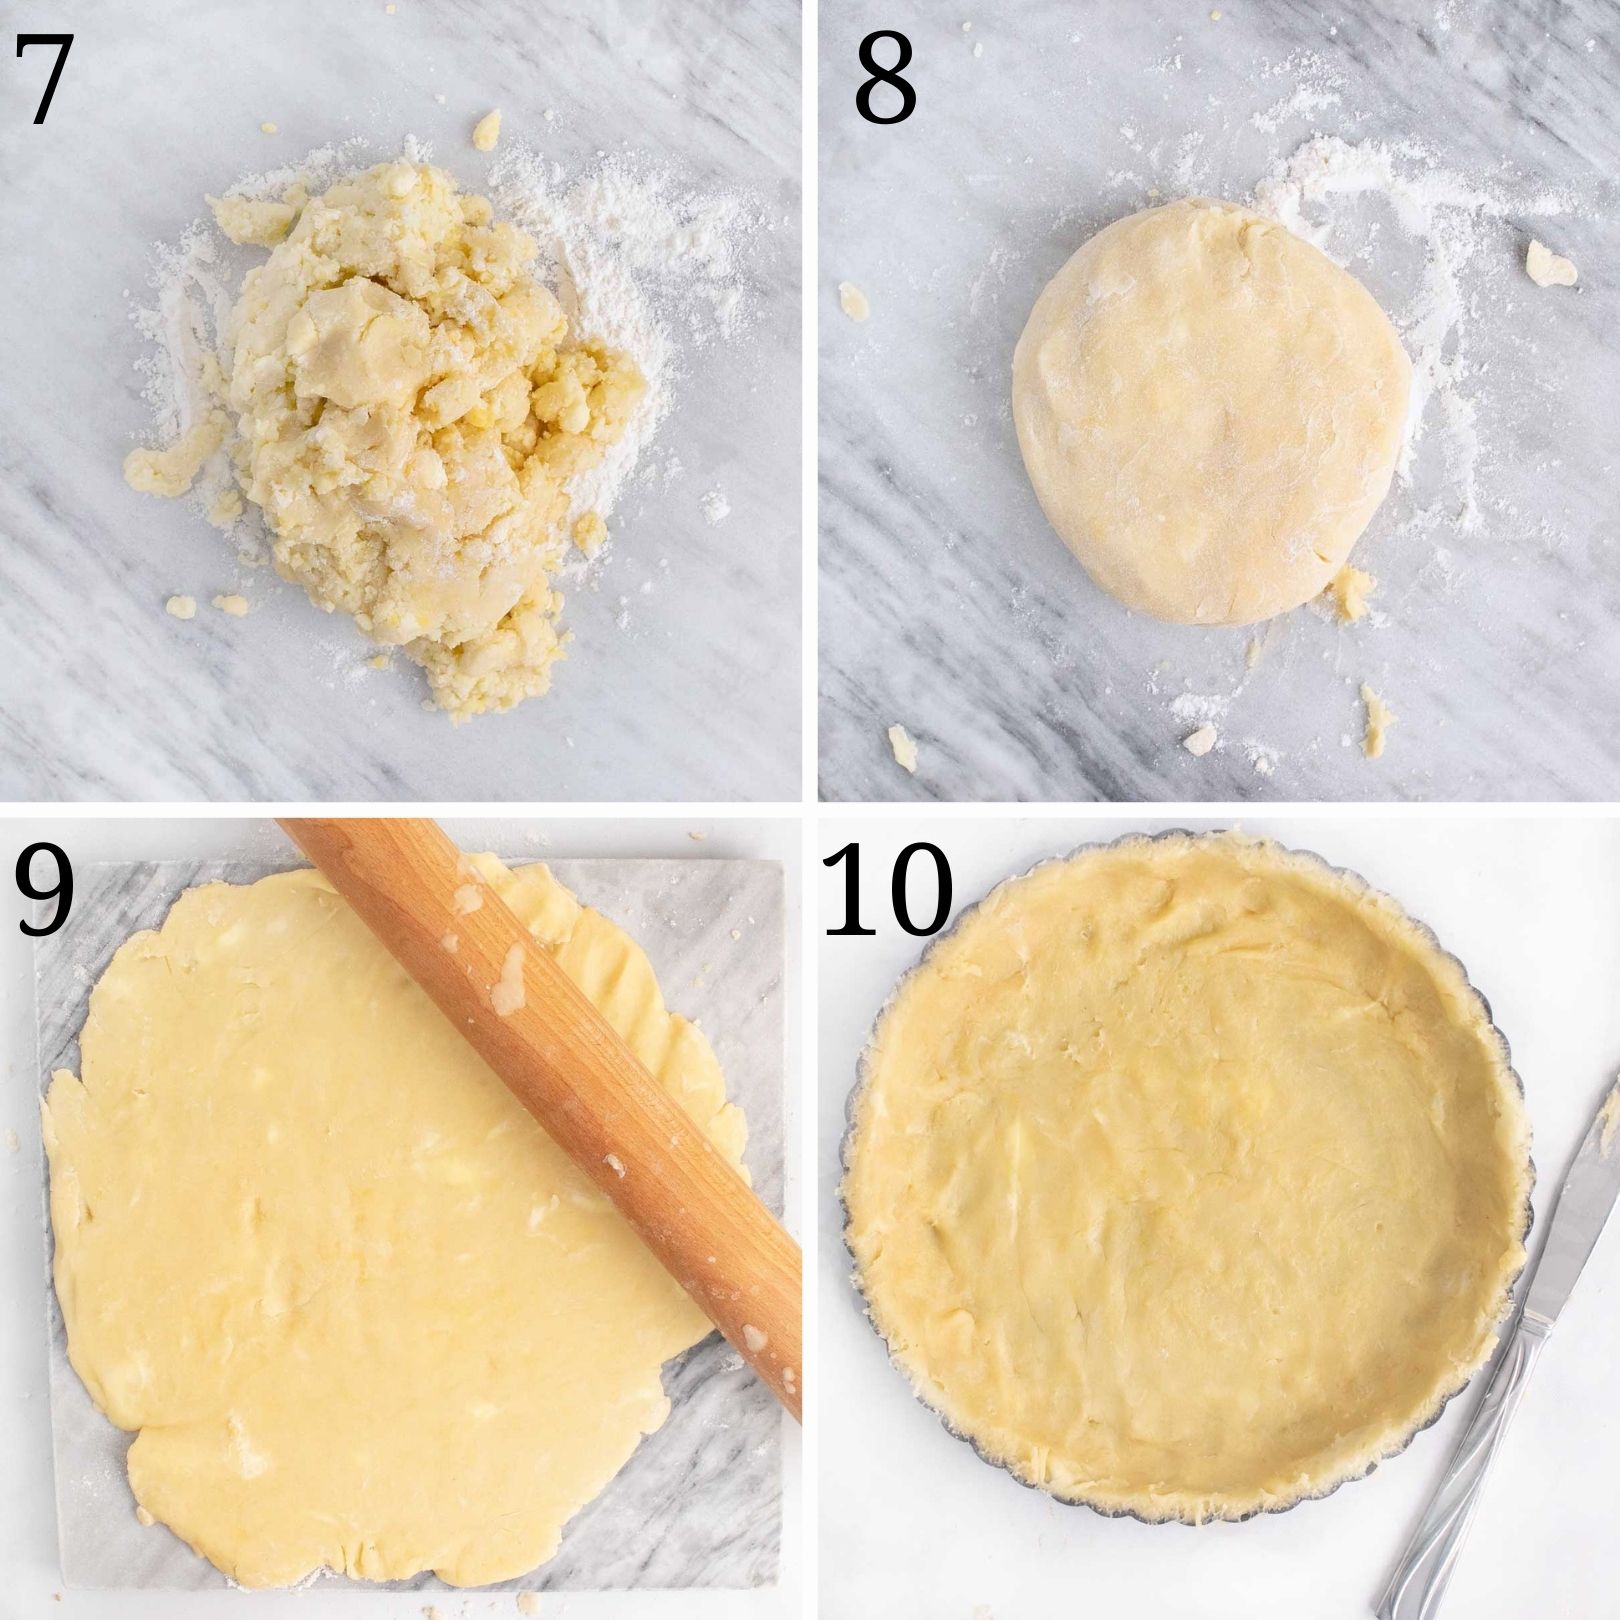 four imges showing how to make the tart crust.